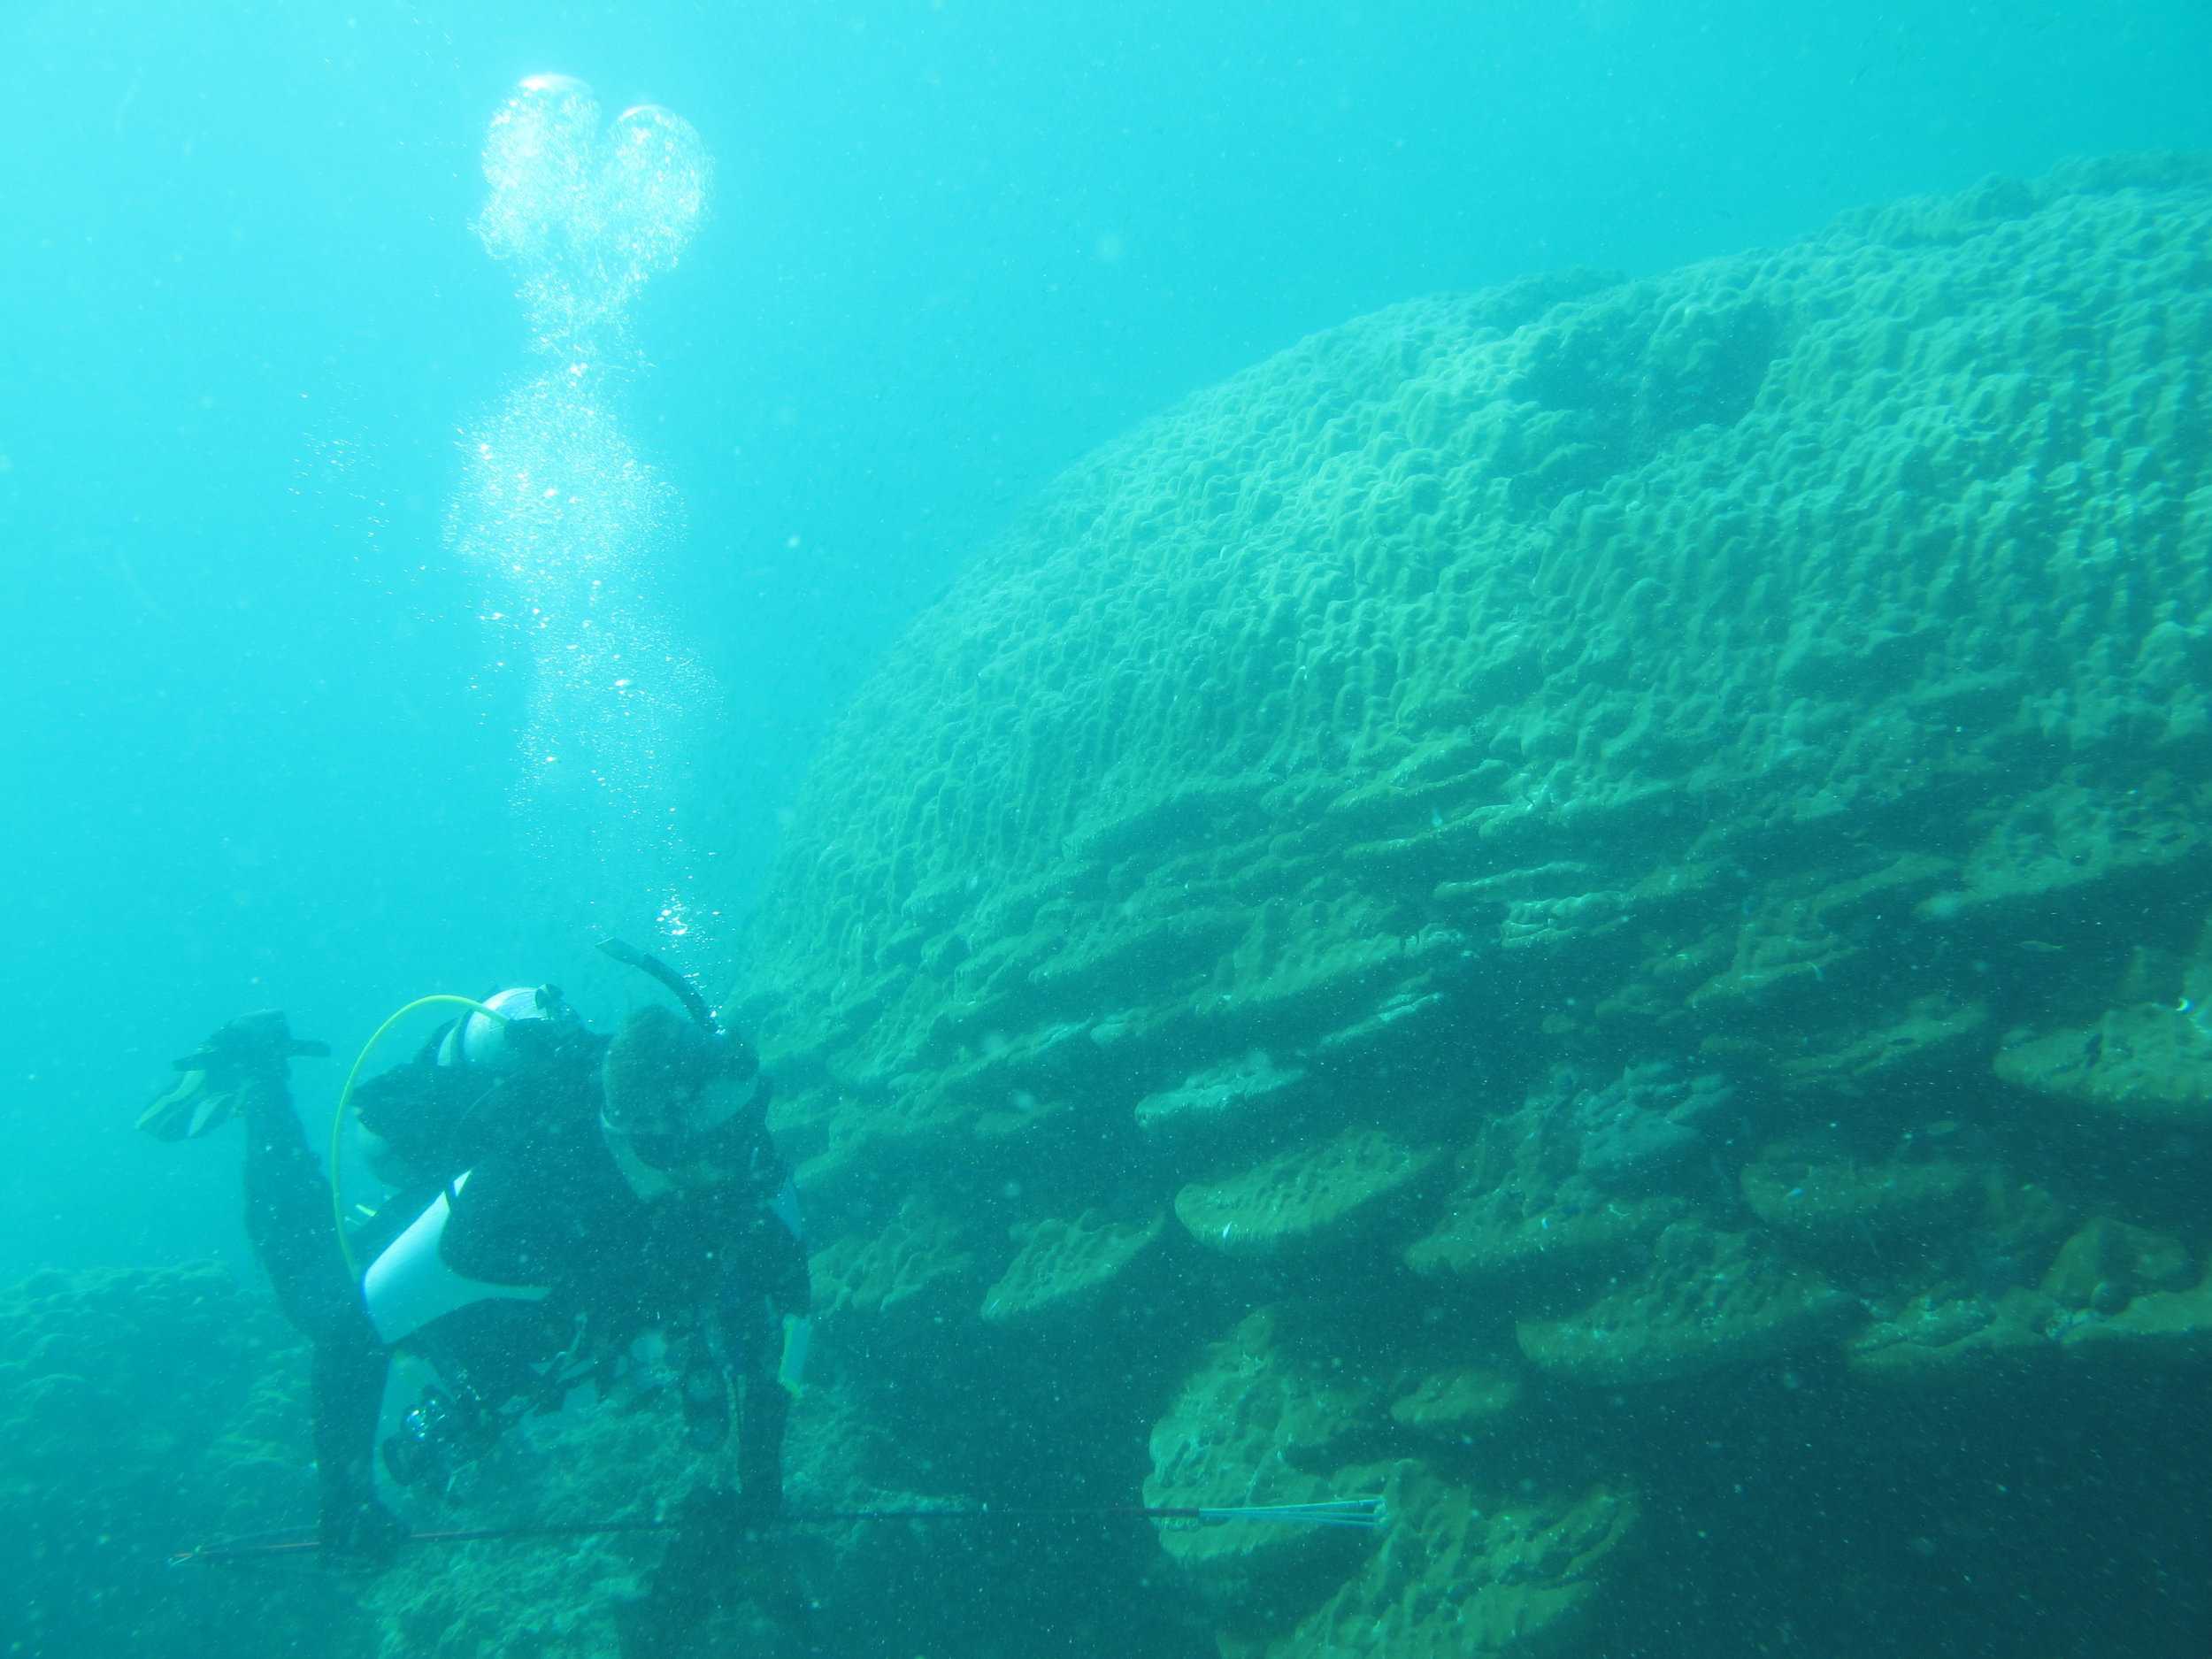 Dave Baker next to an especially large coral in Myanmar